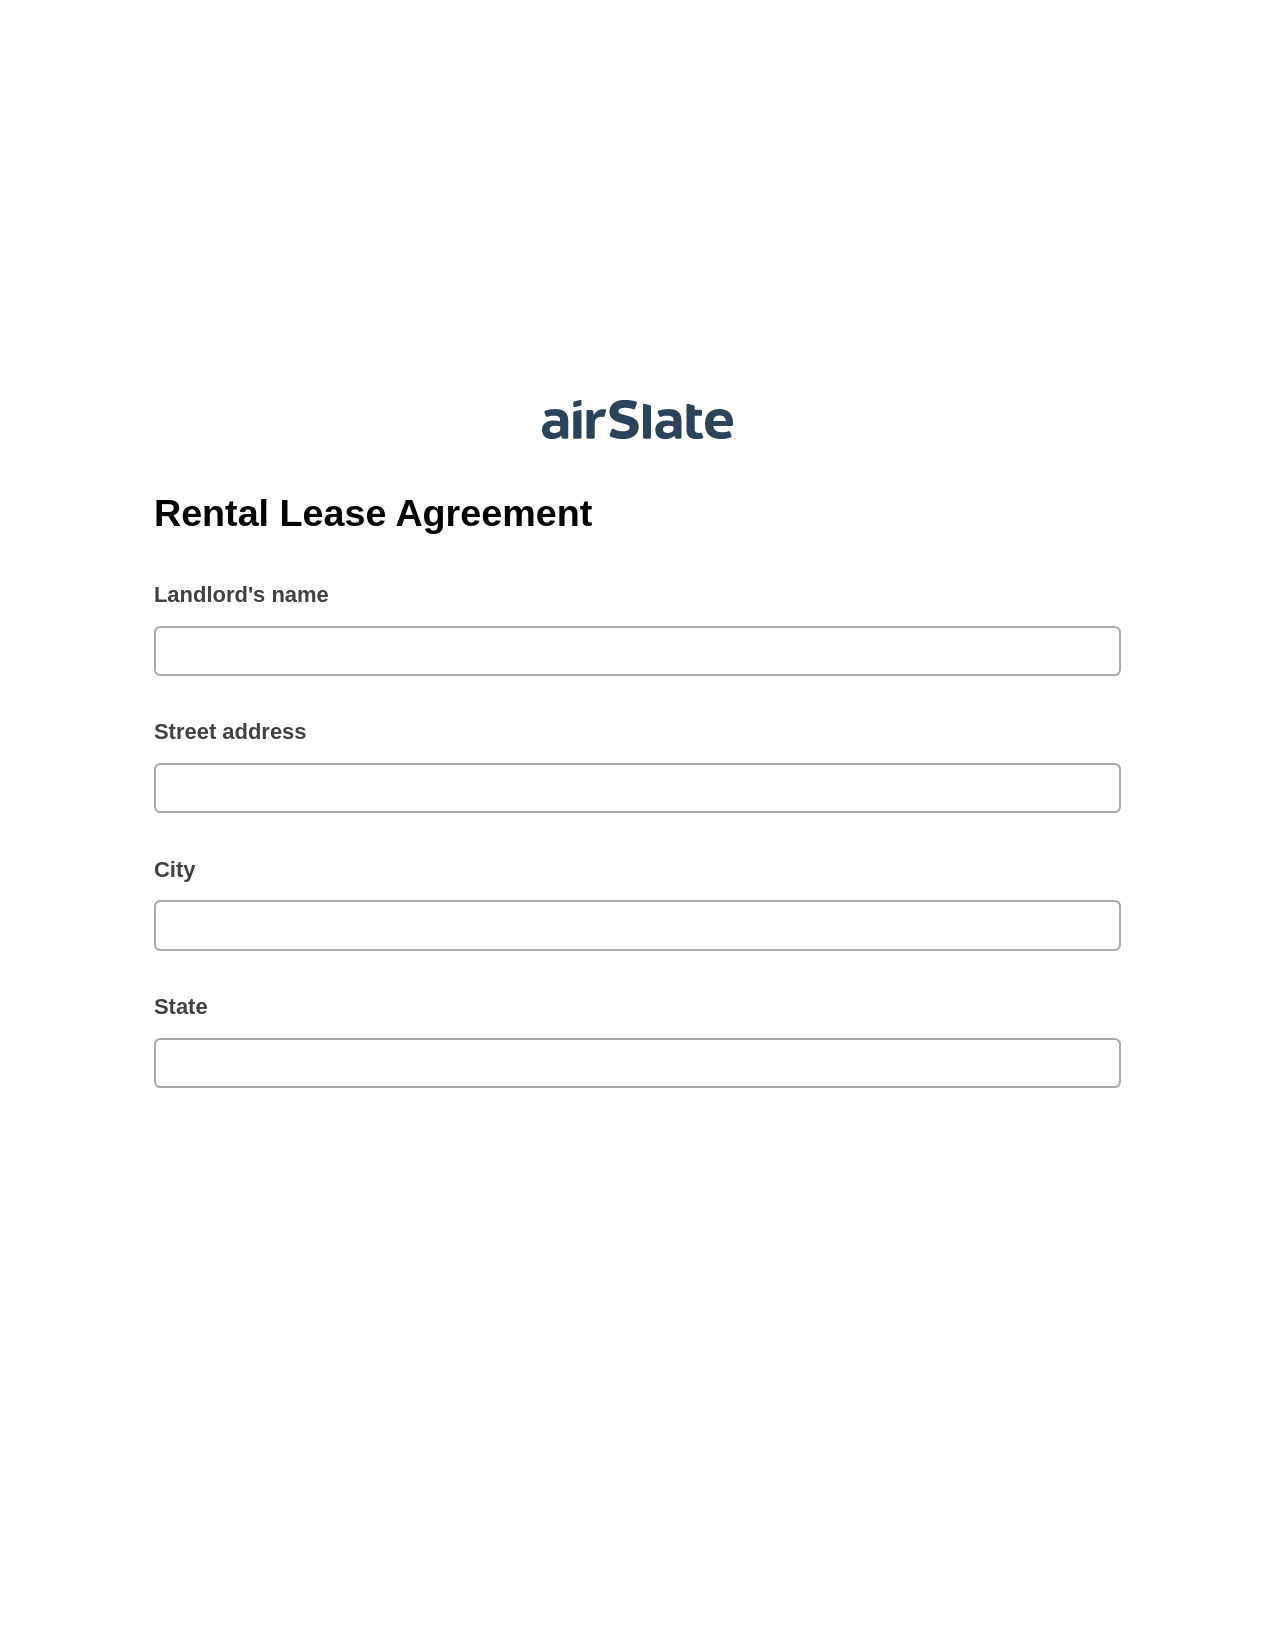 Rental Lease Agreement Pre-fill from Excel Spreadsheet Bot, Update NetSuite Records Bot, Export to MySQL Bot